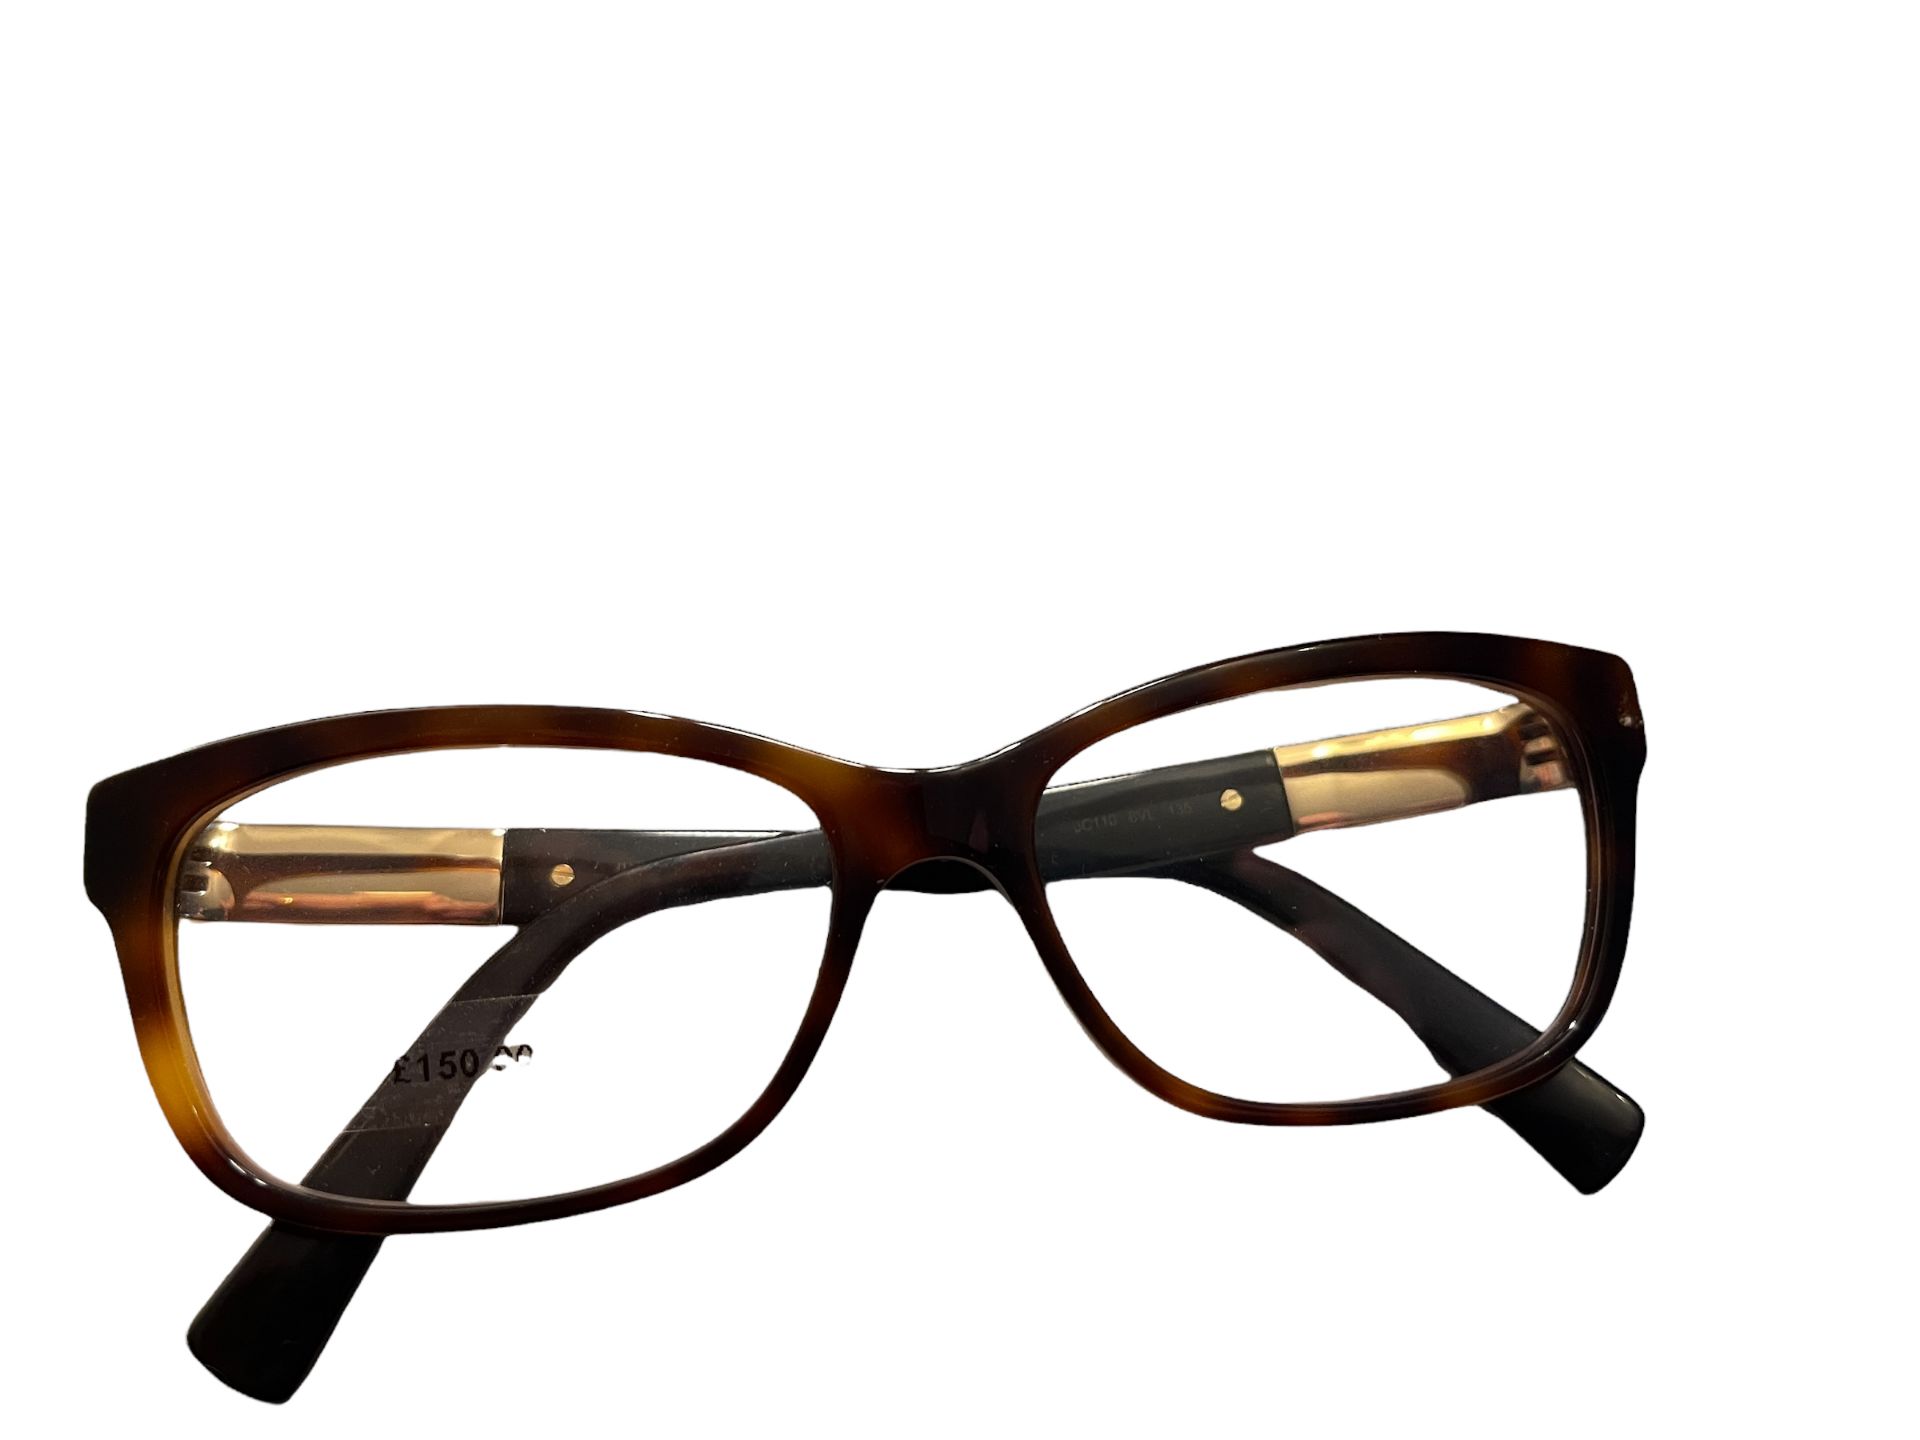 Pair of Ladies JIMMY CHOO Spectacle Frames & Case - Ex Demo or Return from our Private Jet Charte...